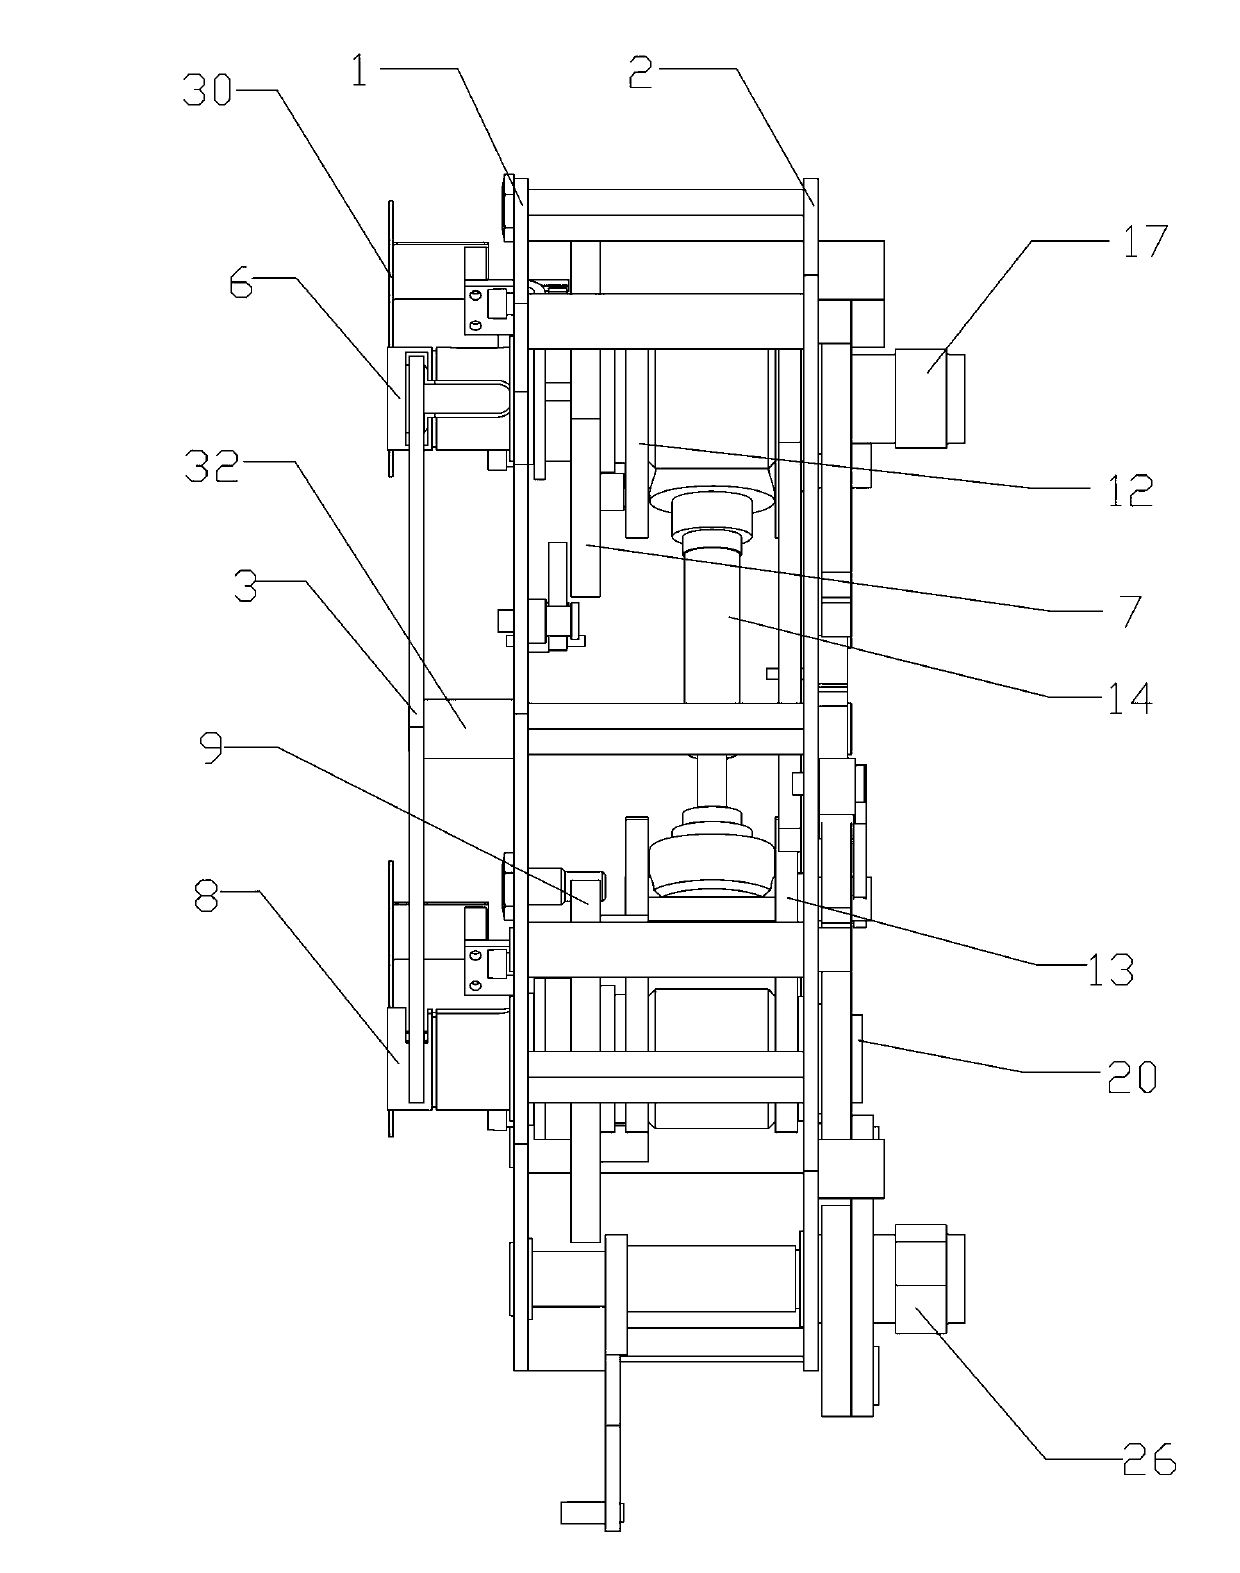 Operating mechanism of simple metal enclosed switch equipment